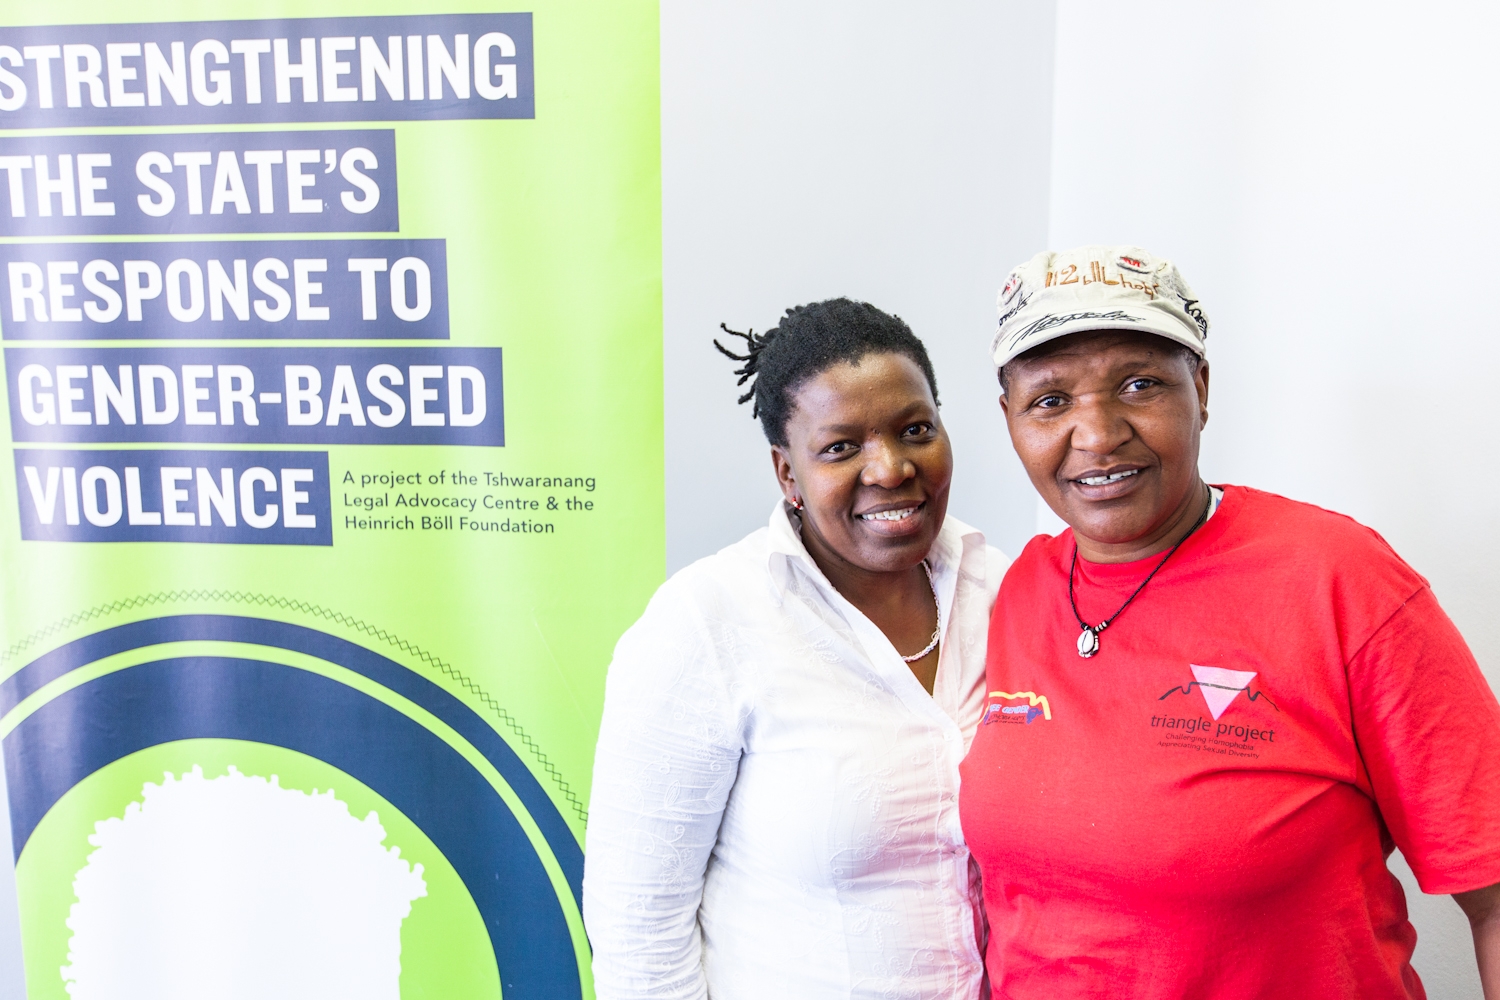 A meeting in South Africa to improve state response to gender-based violence